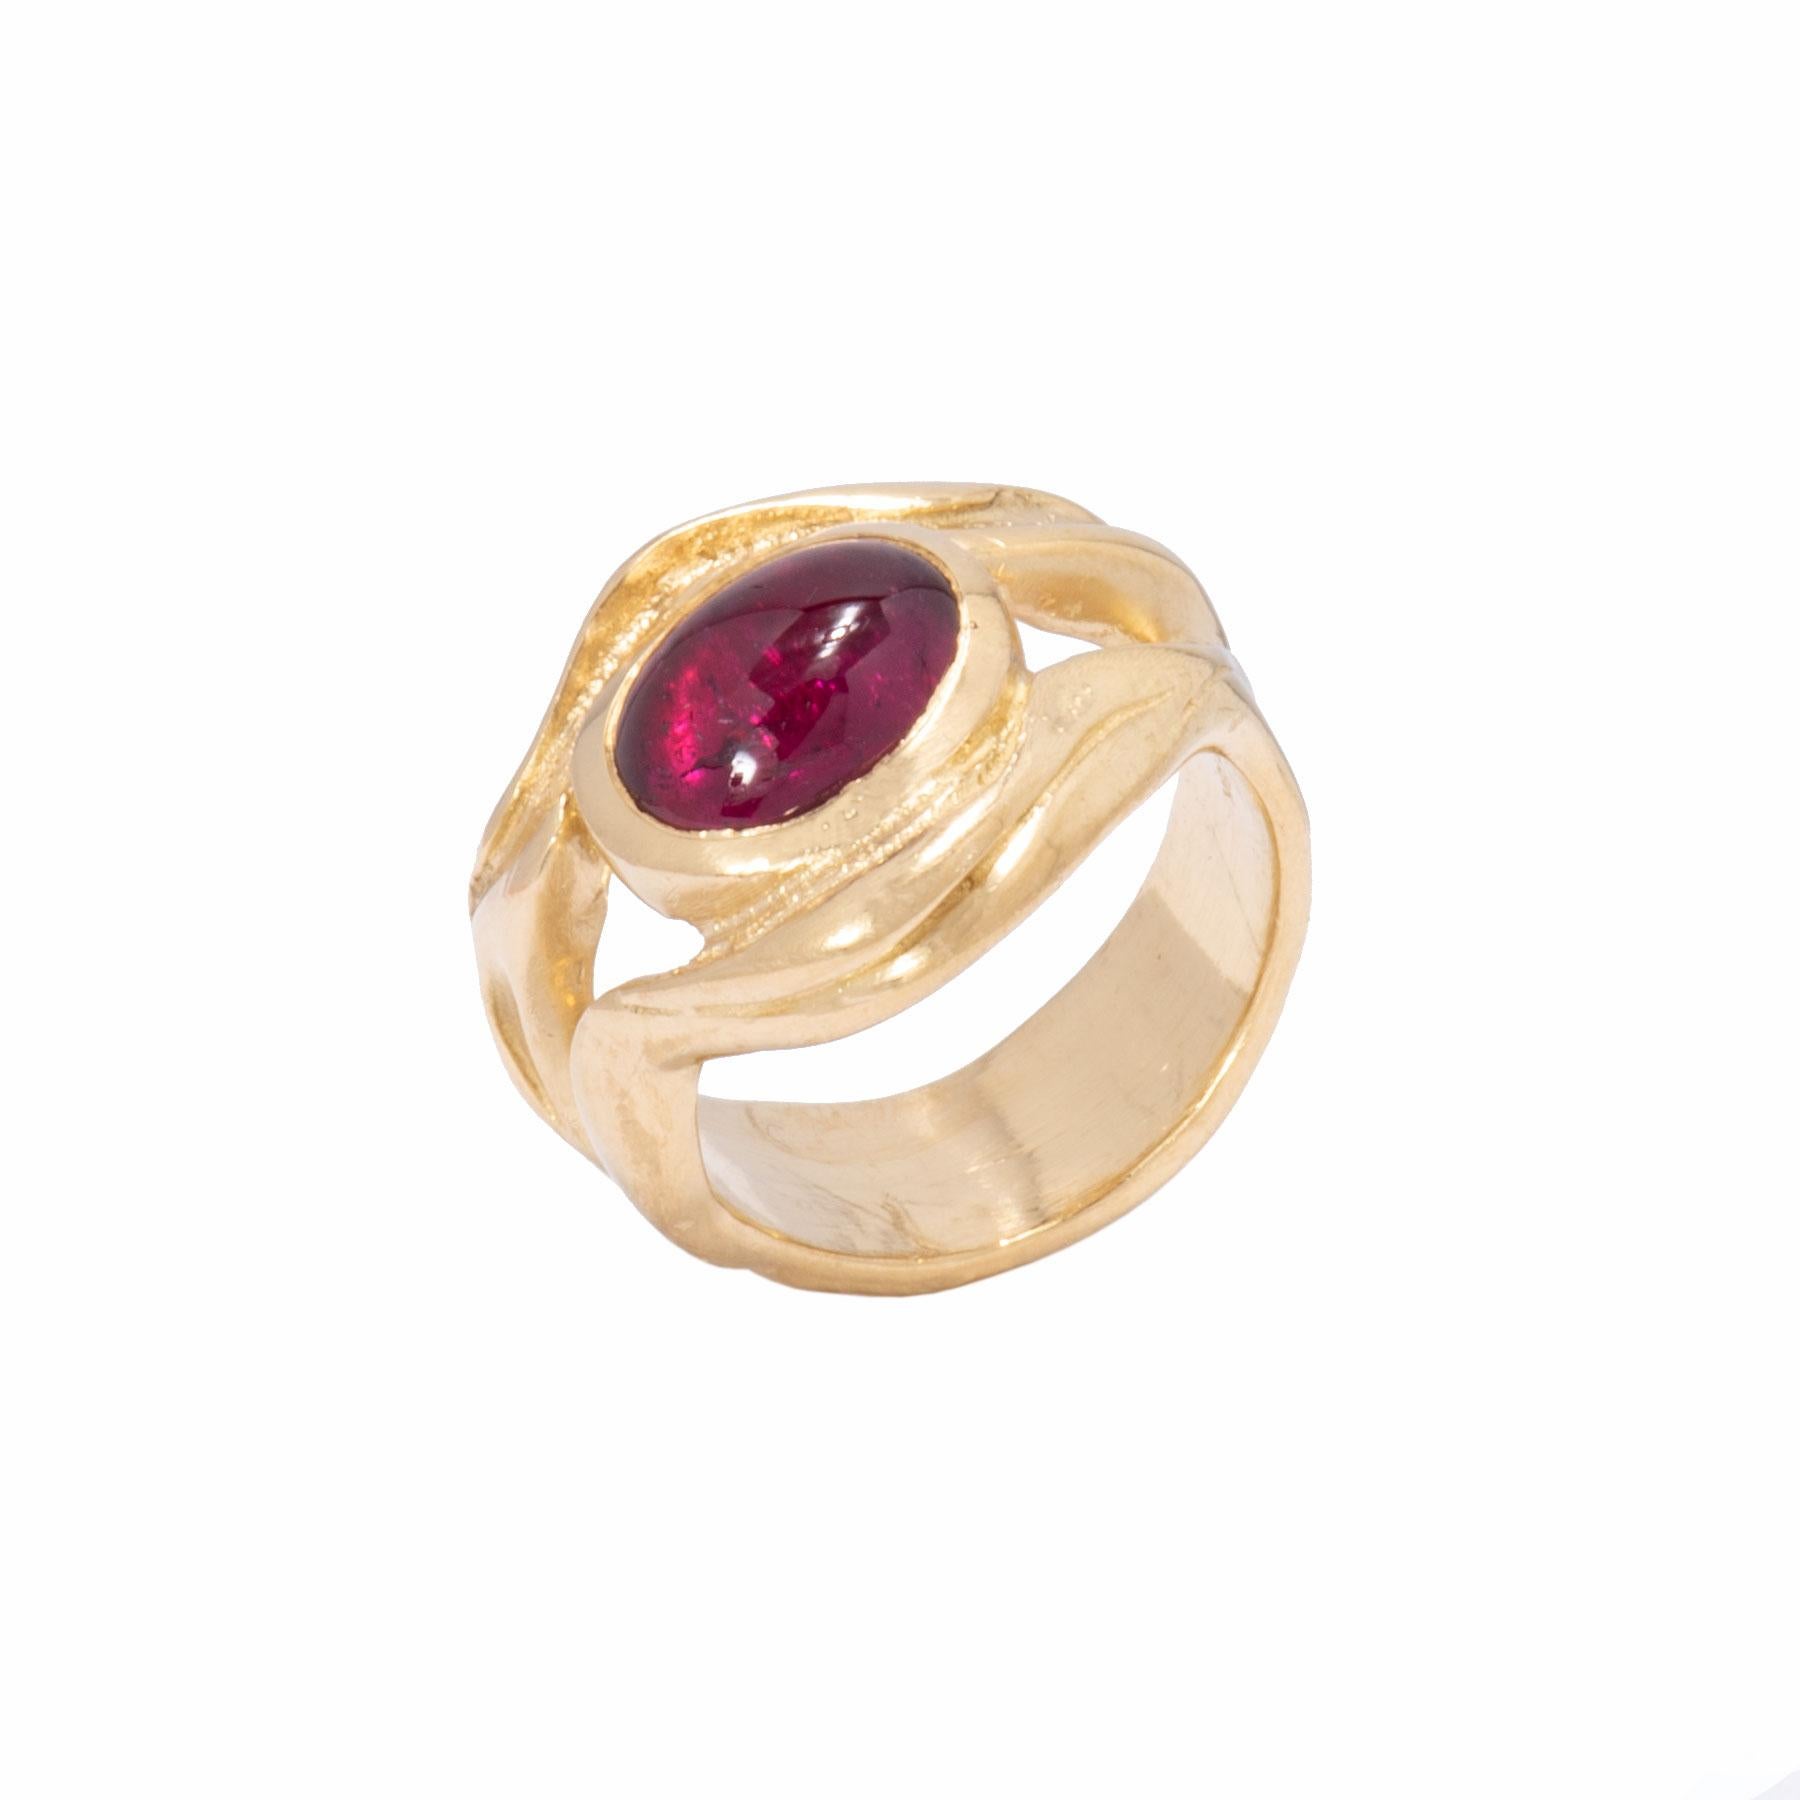 A very cherry pink tourmaline 2.64cts is embraced in waves of 18 karat gold which flow into the shank of our Split Ripple Ring. The face and shanks of the Split Ripple Ring are carved like a flow of 2 streams parting around a magnificent pink